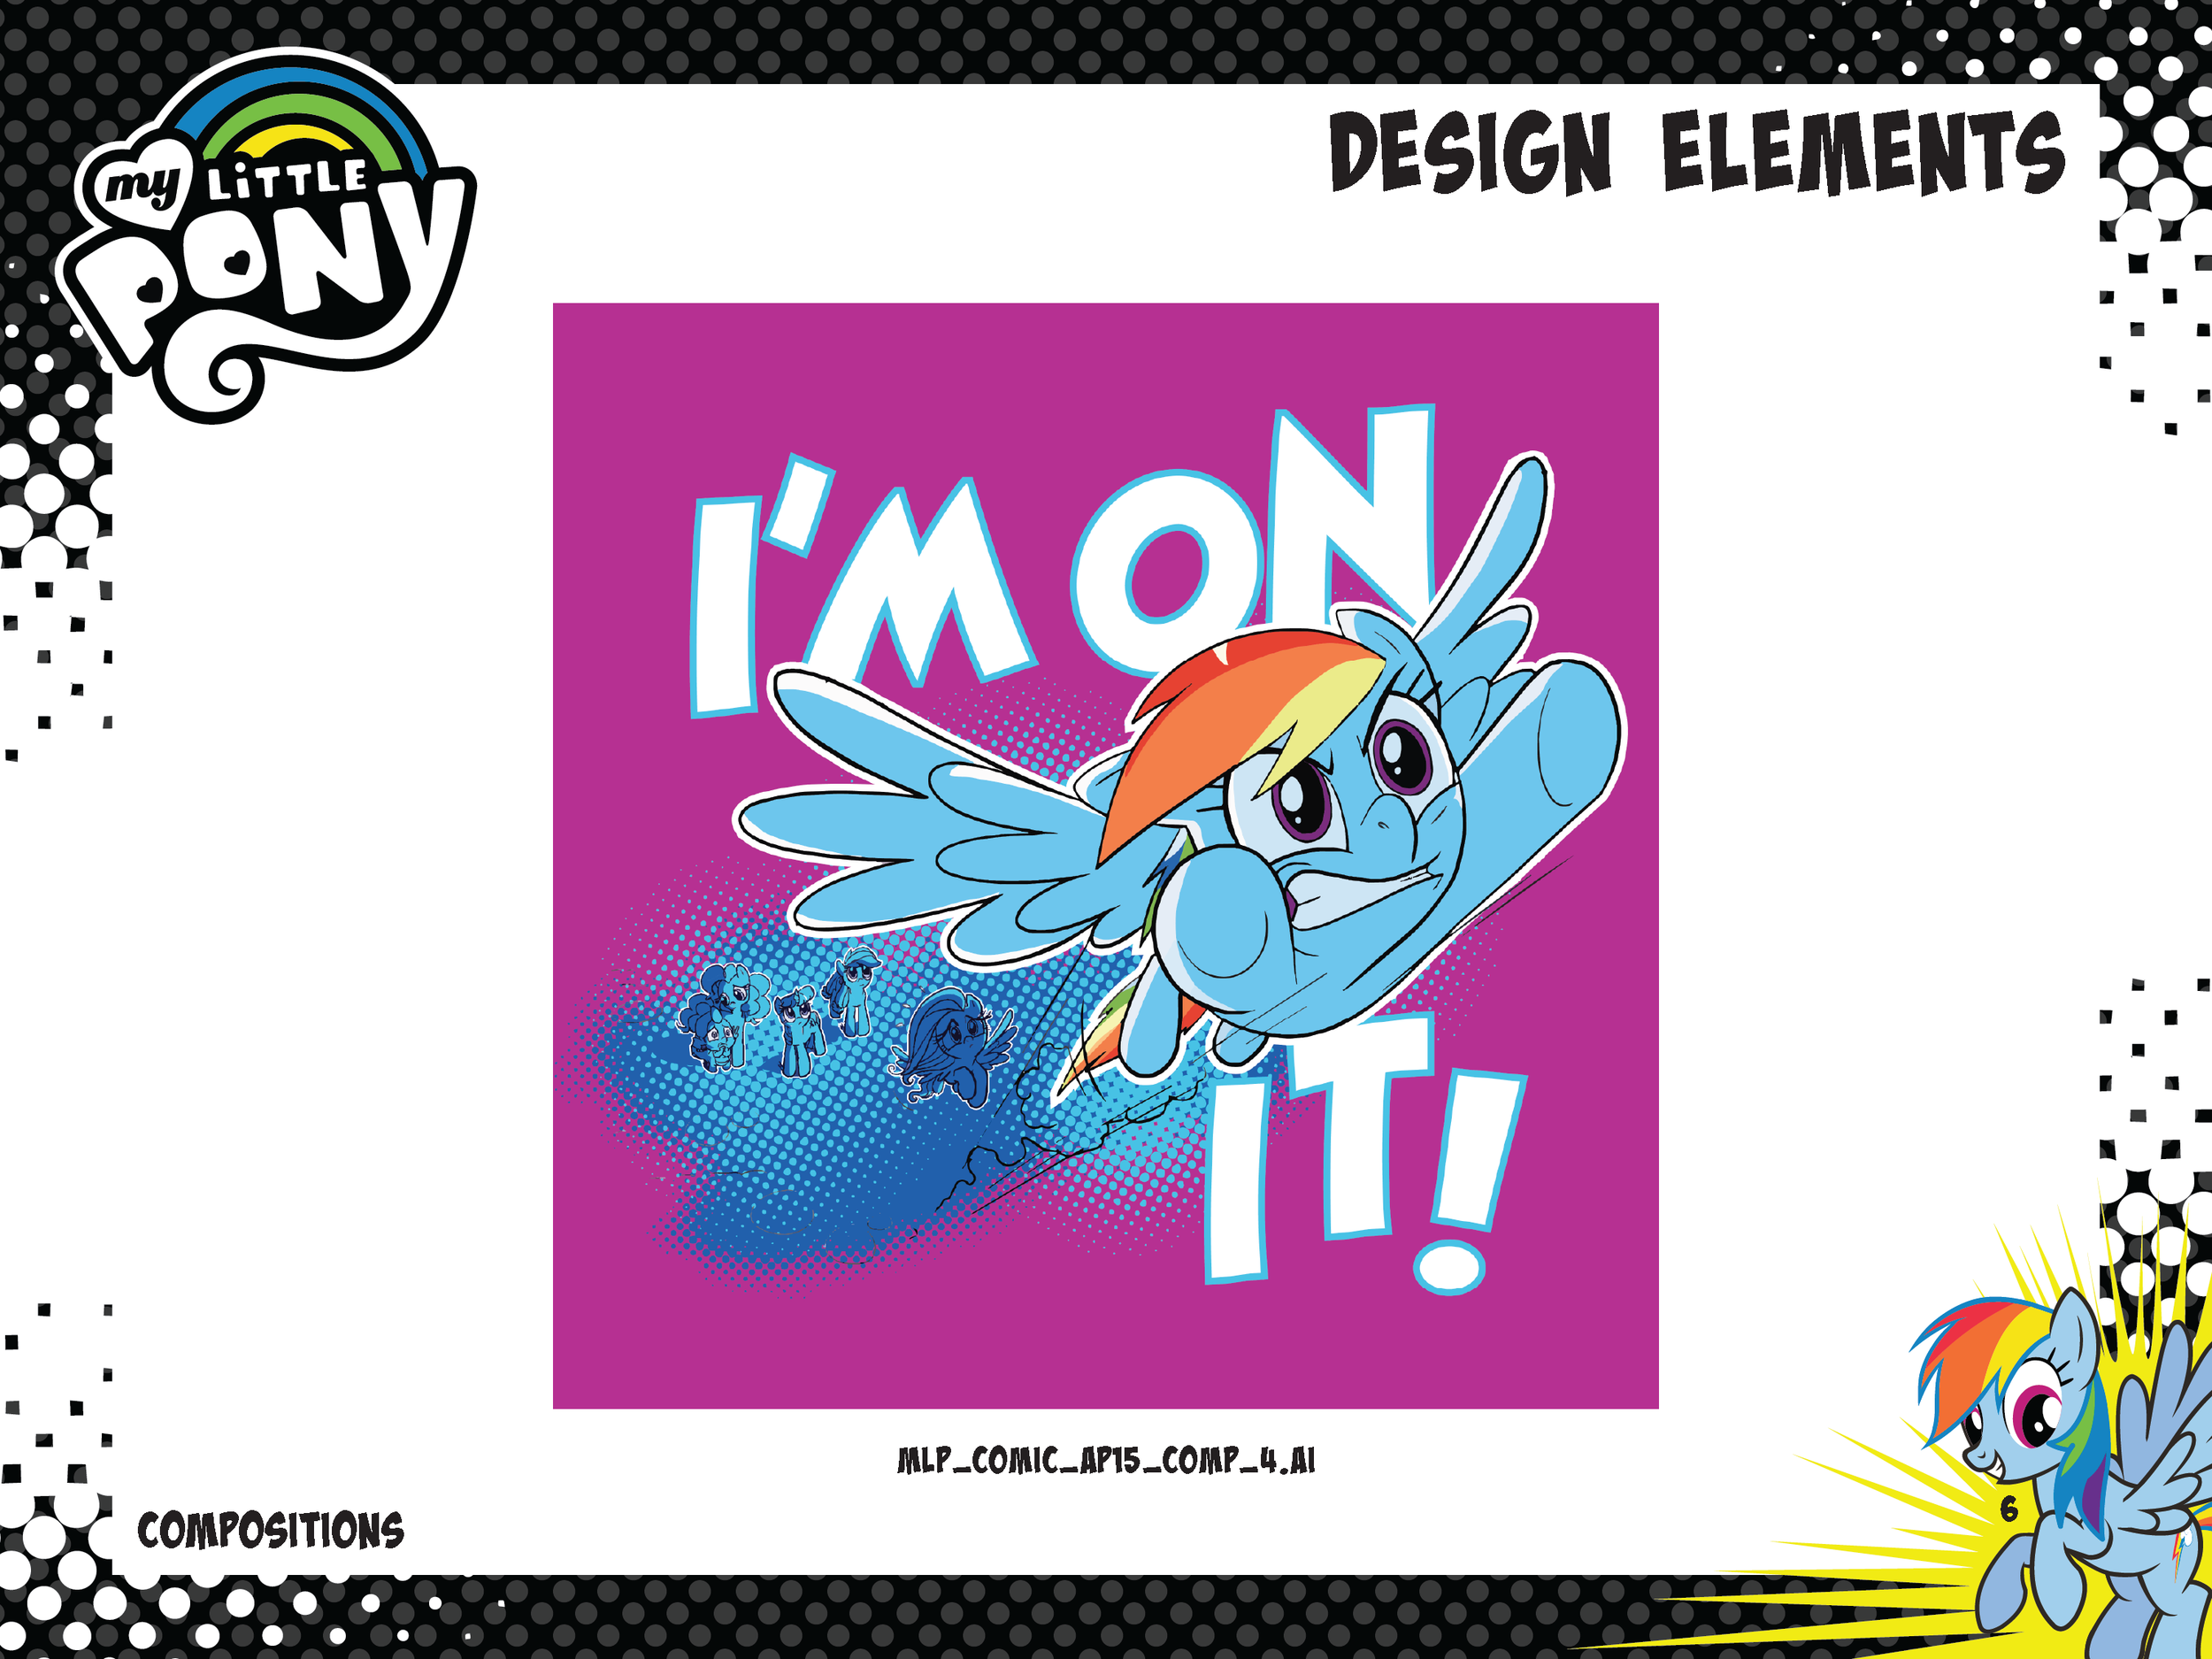 MLP_COMIC_VOL1_ARTPACK_FW15_Page_06.png